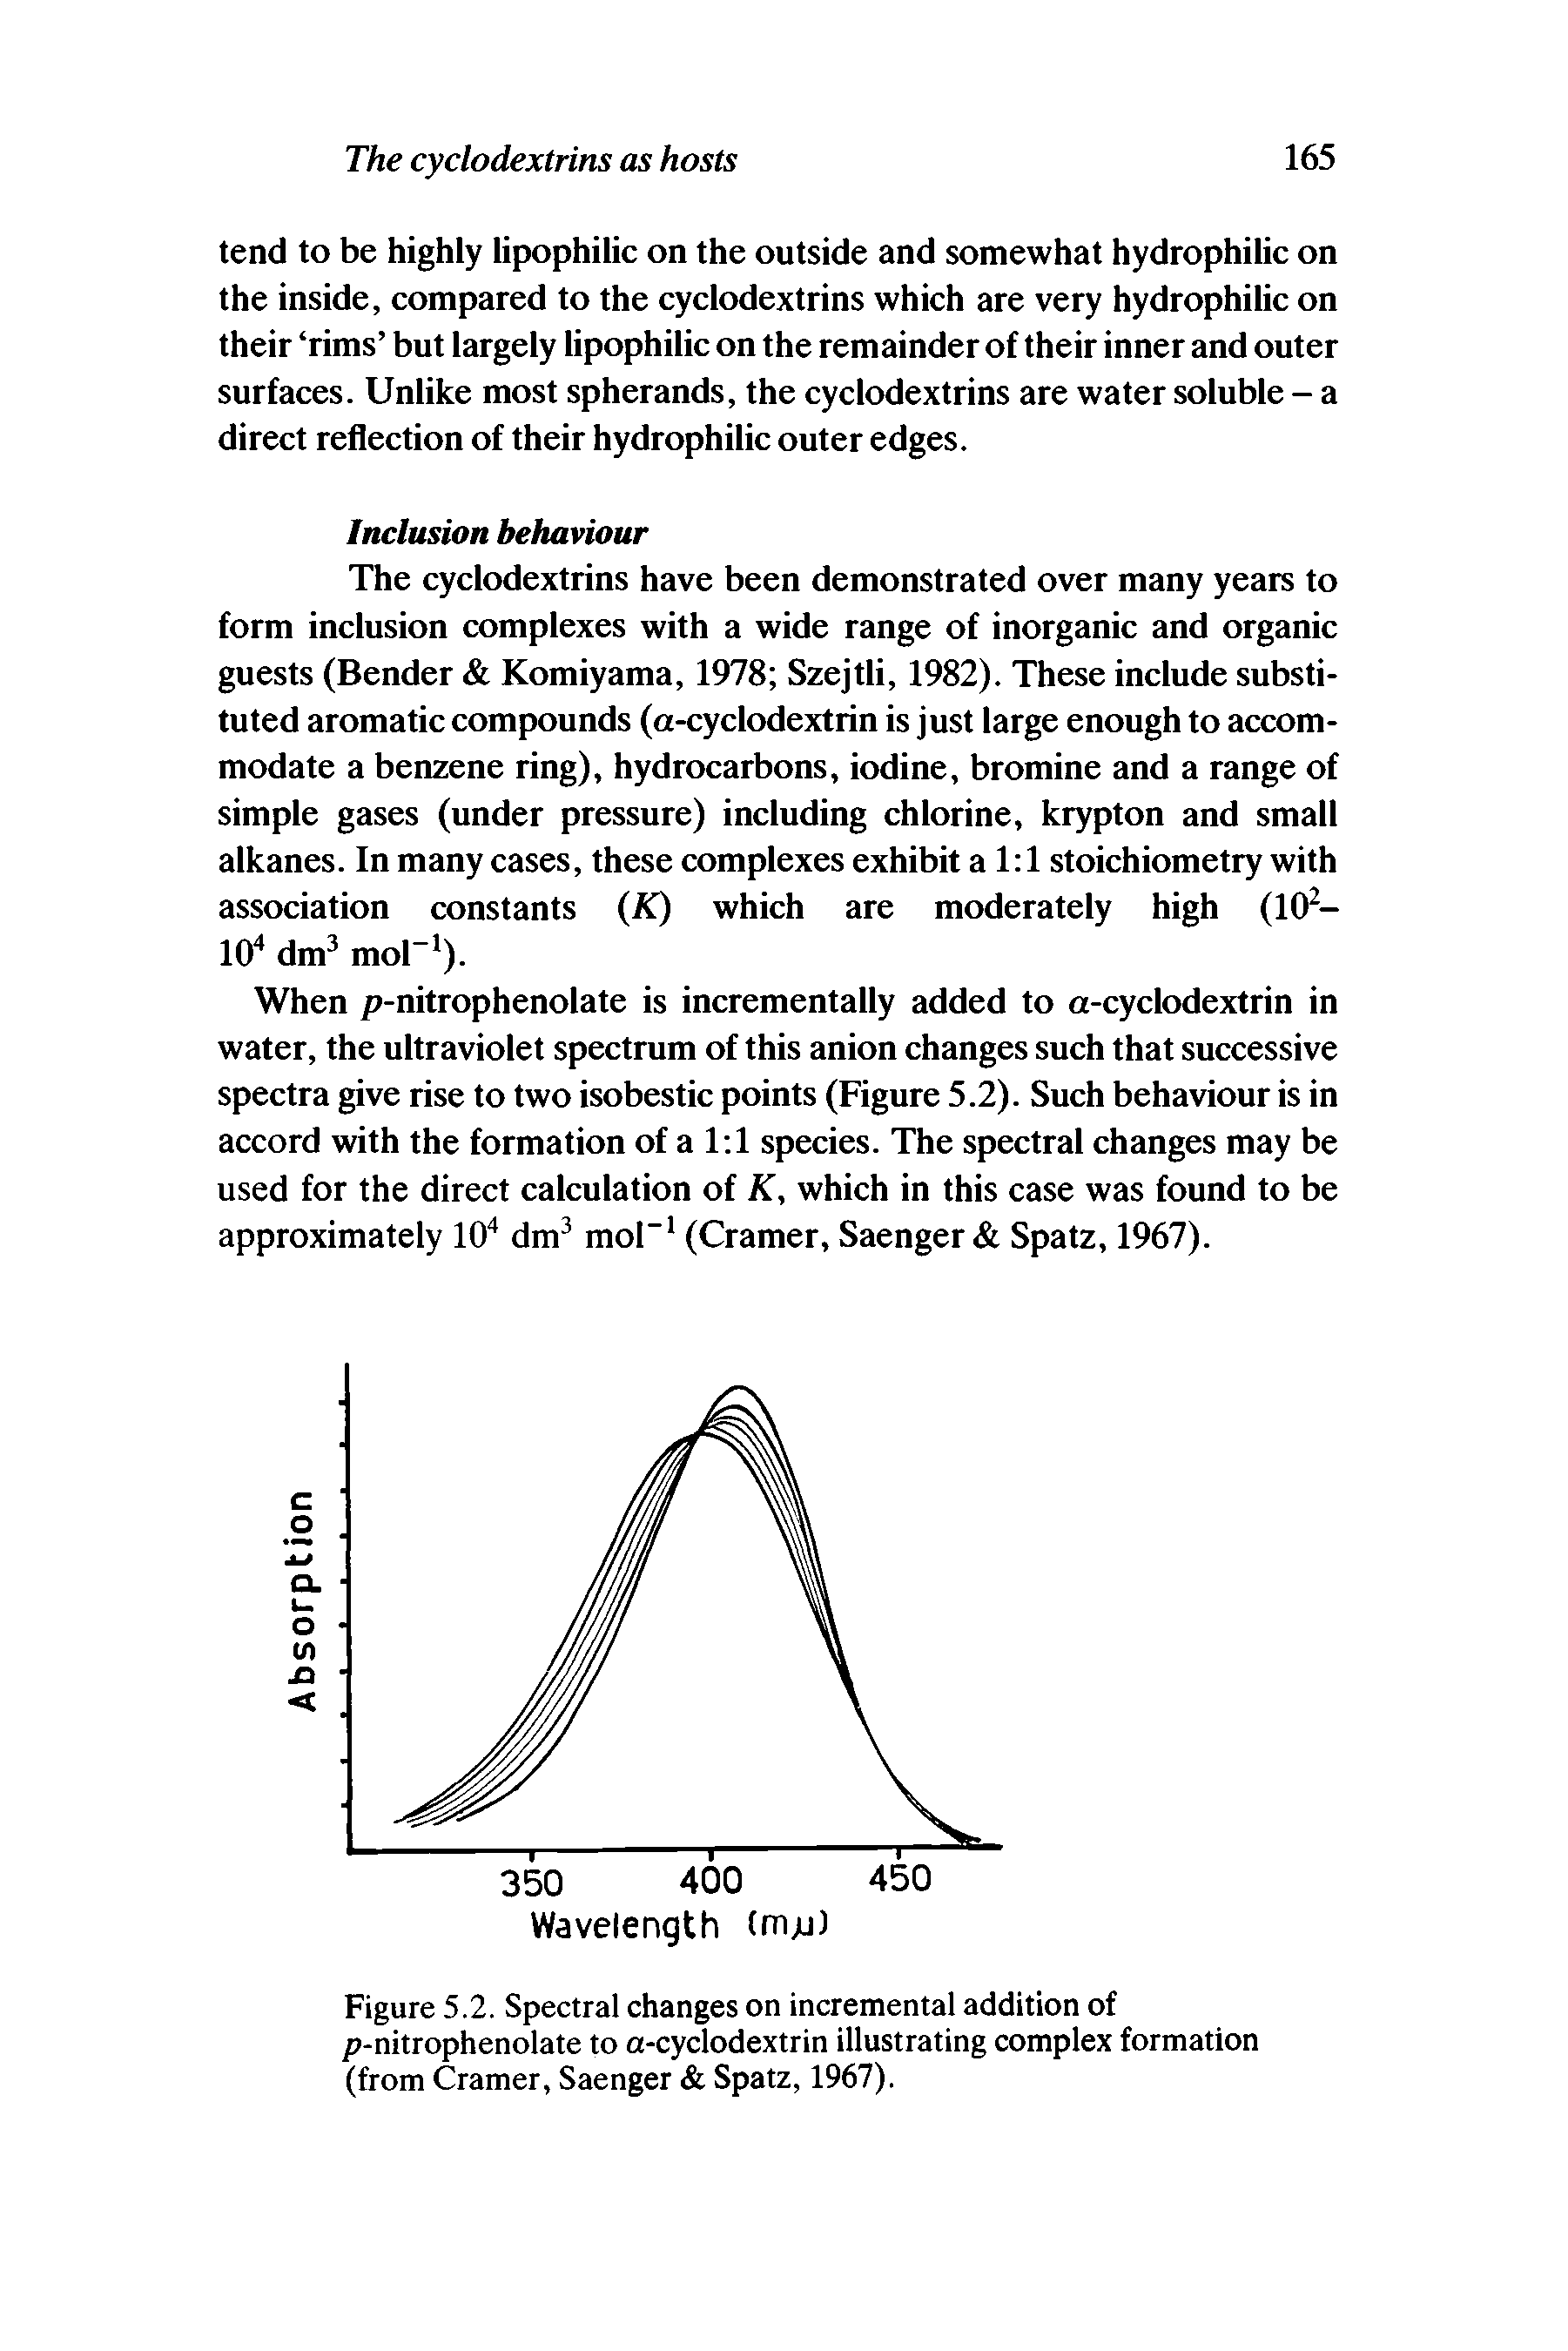 Figure 5.2. Spectral changes on incremental addition of p-nitrophenolate to a-cyclodextrin illustrating complex formation (from Cramer, Saenger Spatz, 1967).